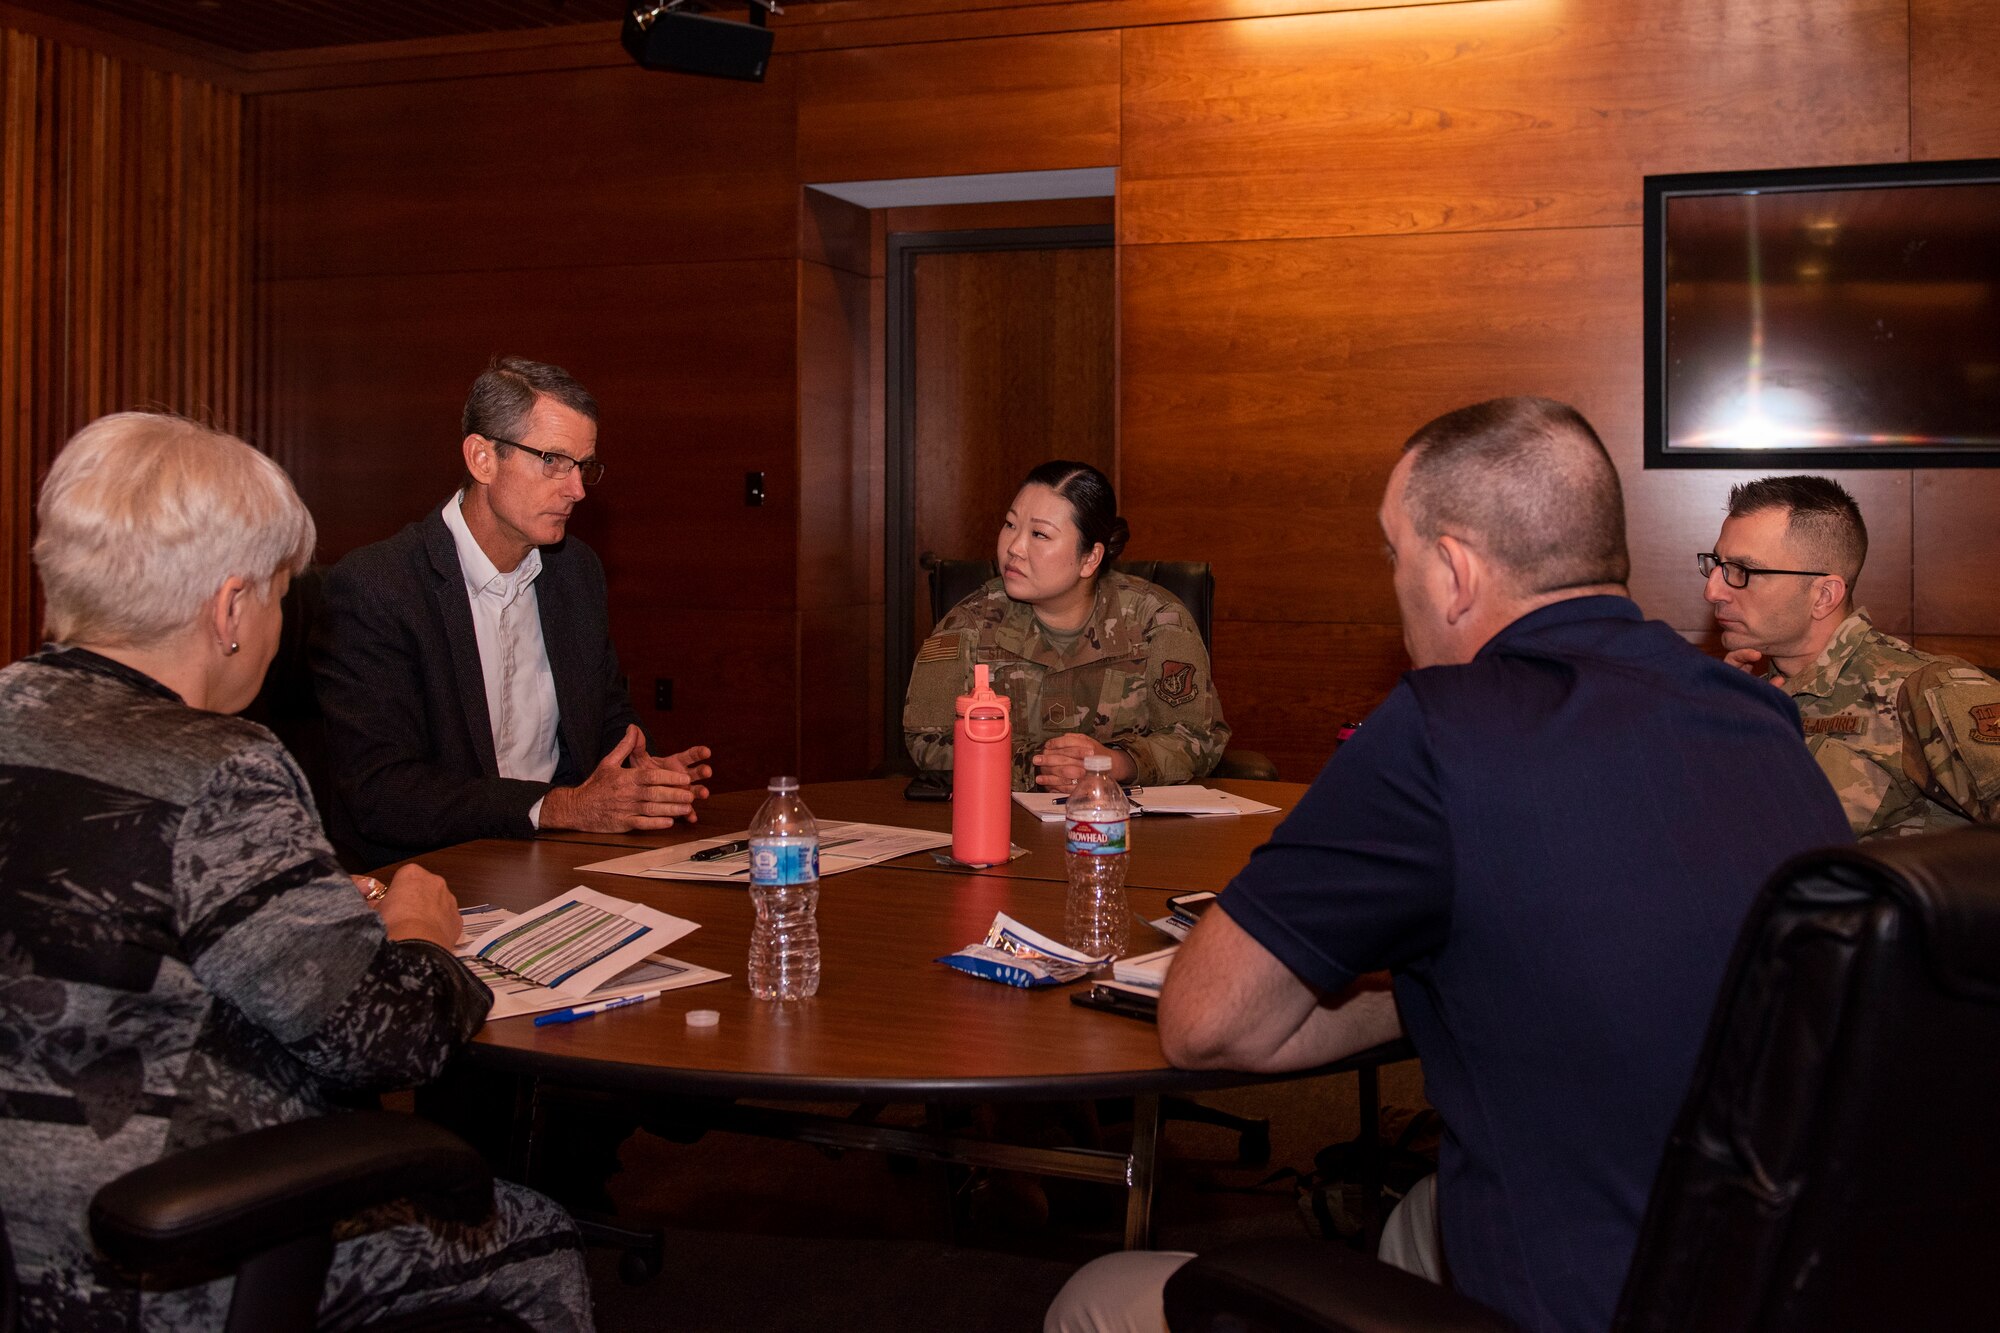 The Eleventh Air Force holds a two-day workshop for its senior enlisted leaders and civilians at Joint Base Elmendorf-Richardson, Alaska, Nov. 6, 2019. More than 40 attendees from Alaska, Hawaii and Guam discussed topics on resiliency and best practices in operating a wing.